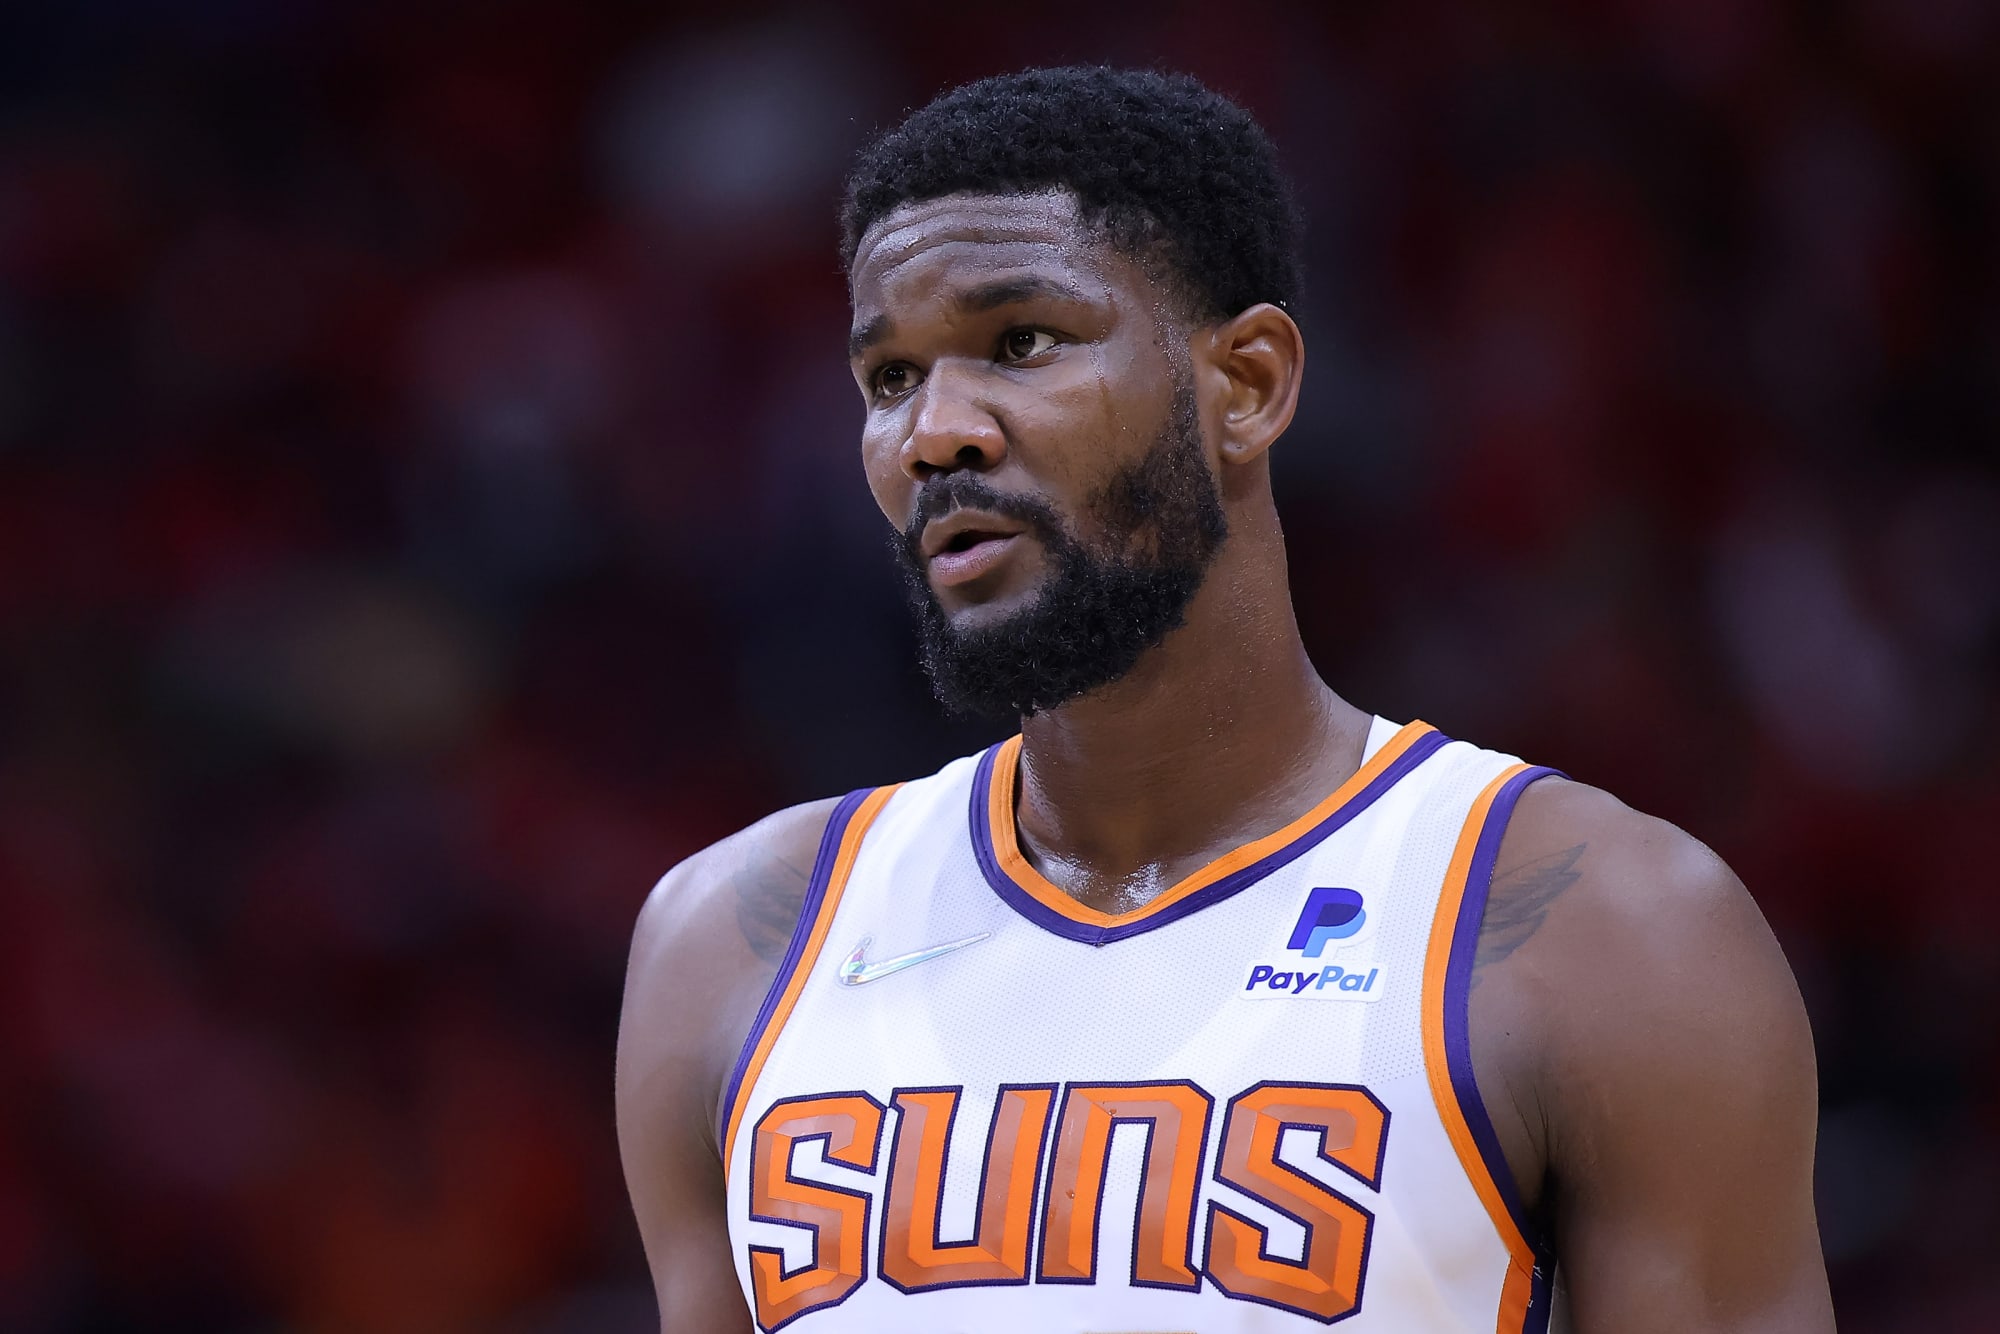 The Suns can have misplaced Recreation 7 and Deandre Ayton in a single evening